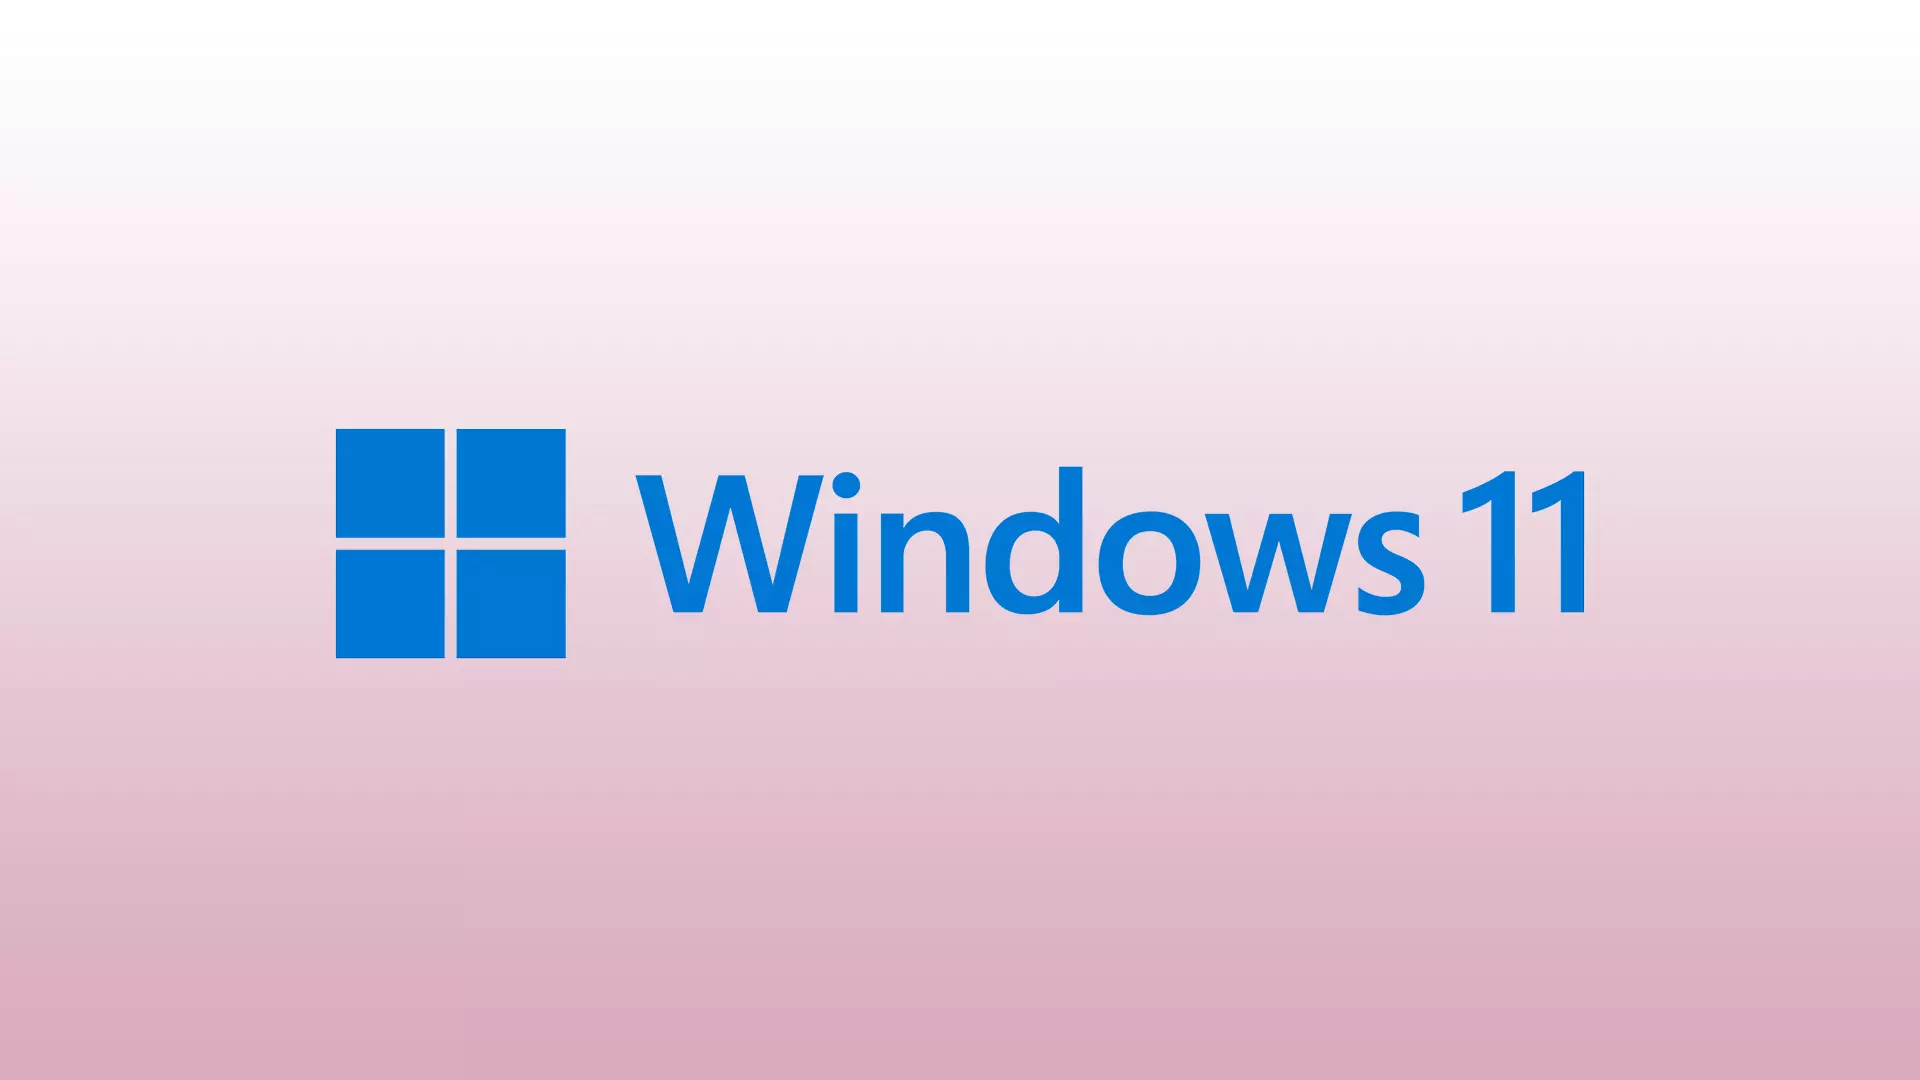 How to automatically log in to Windows 11 after it boots